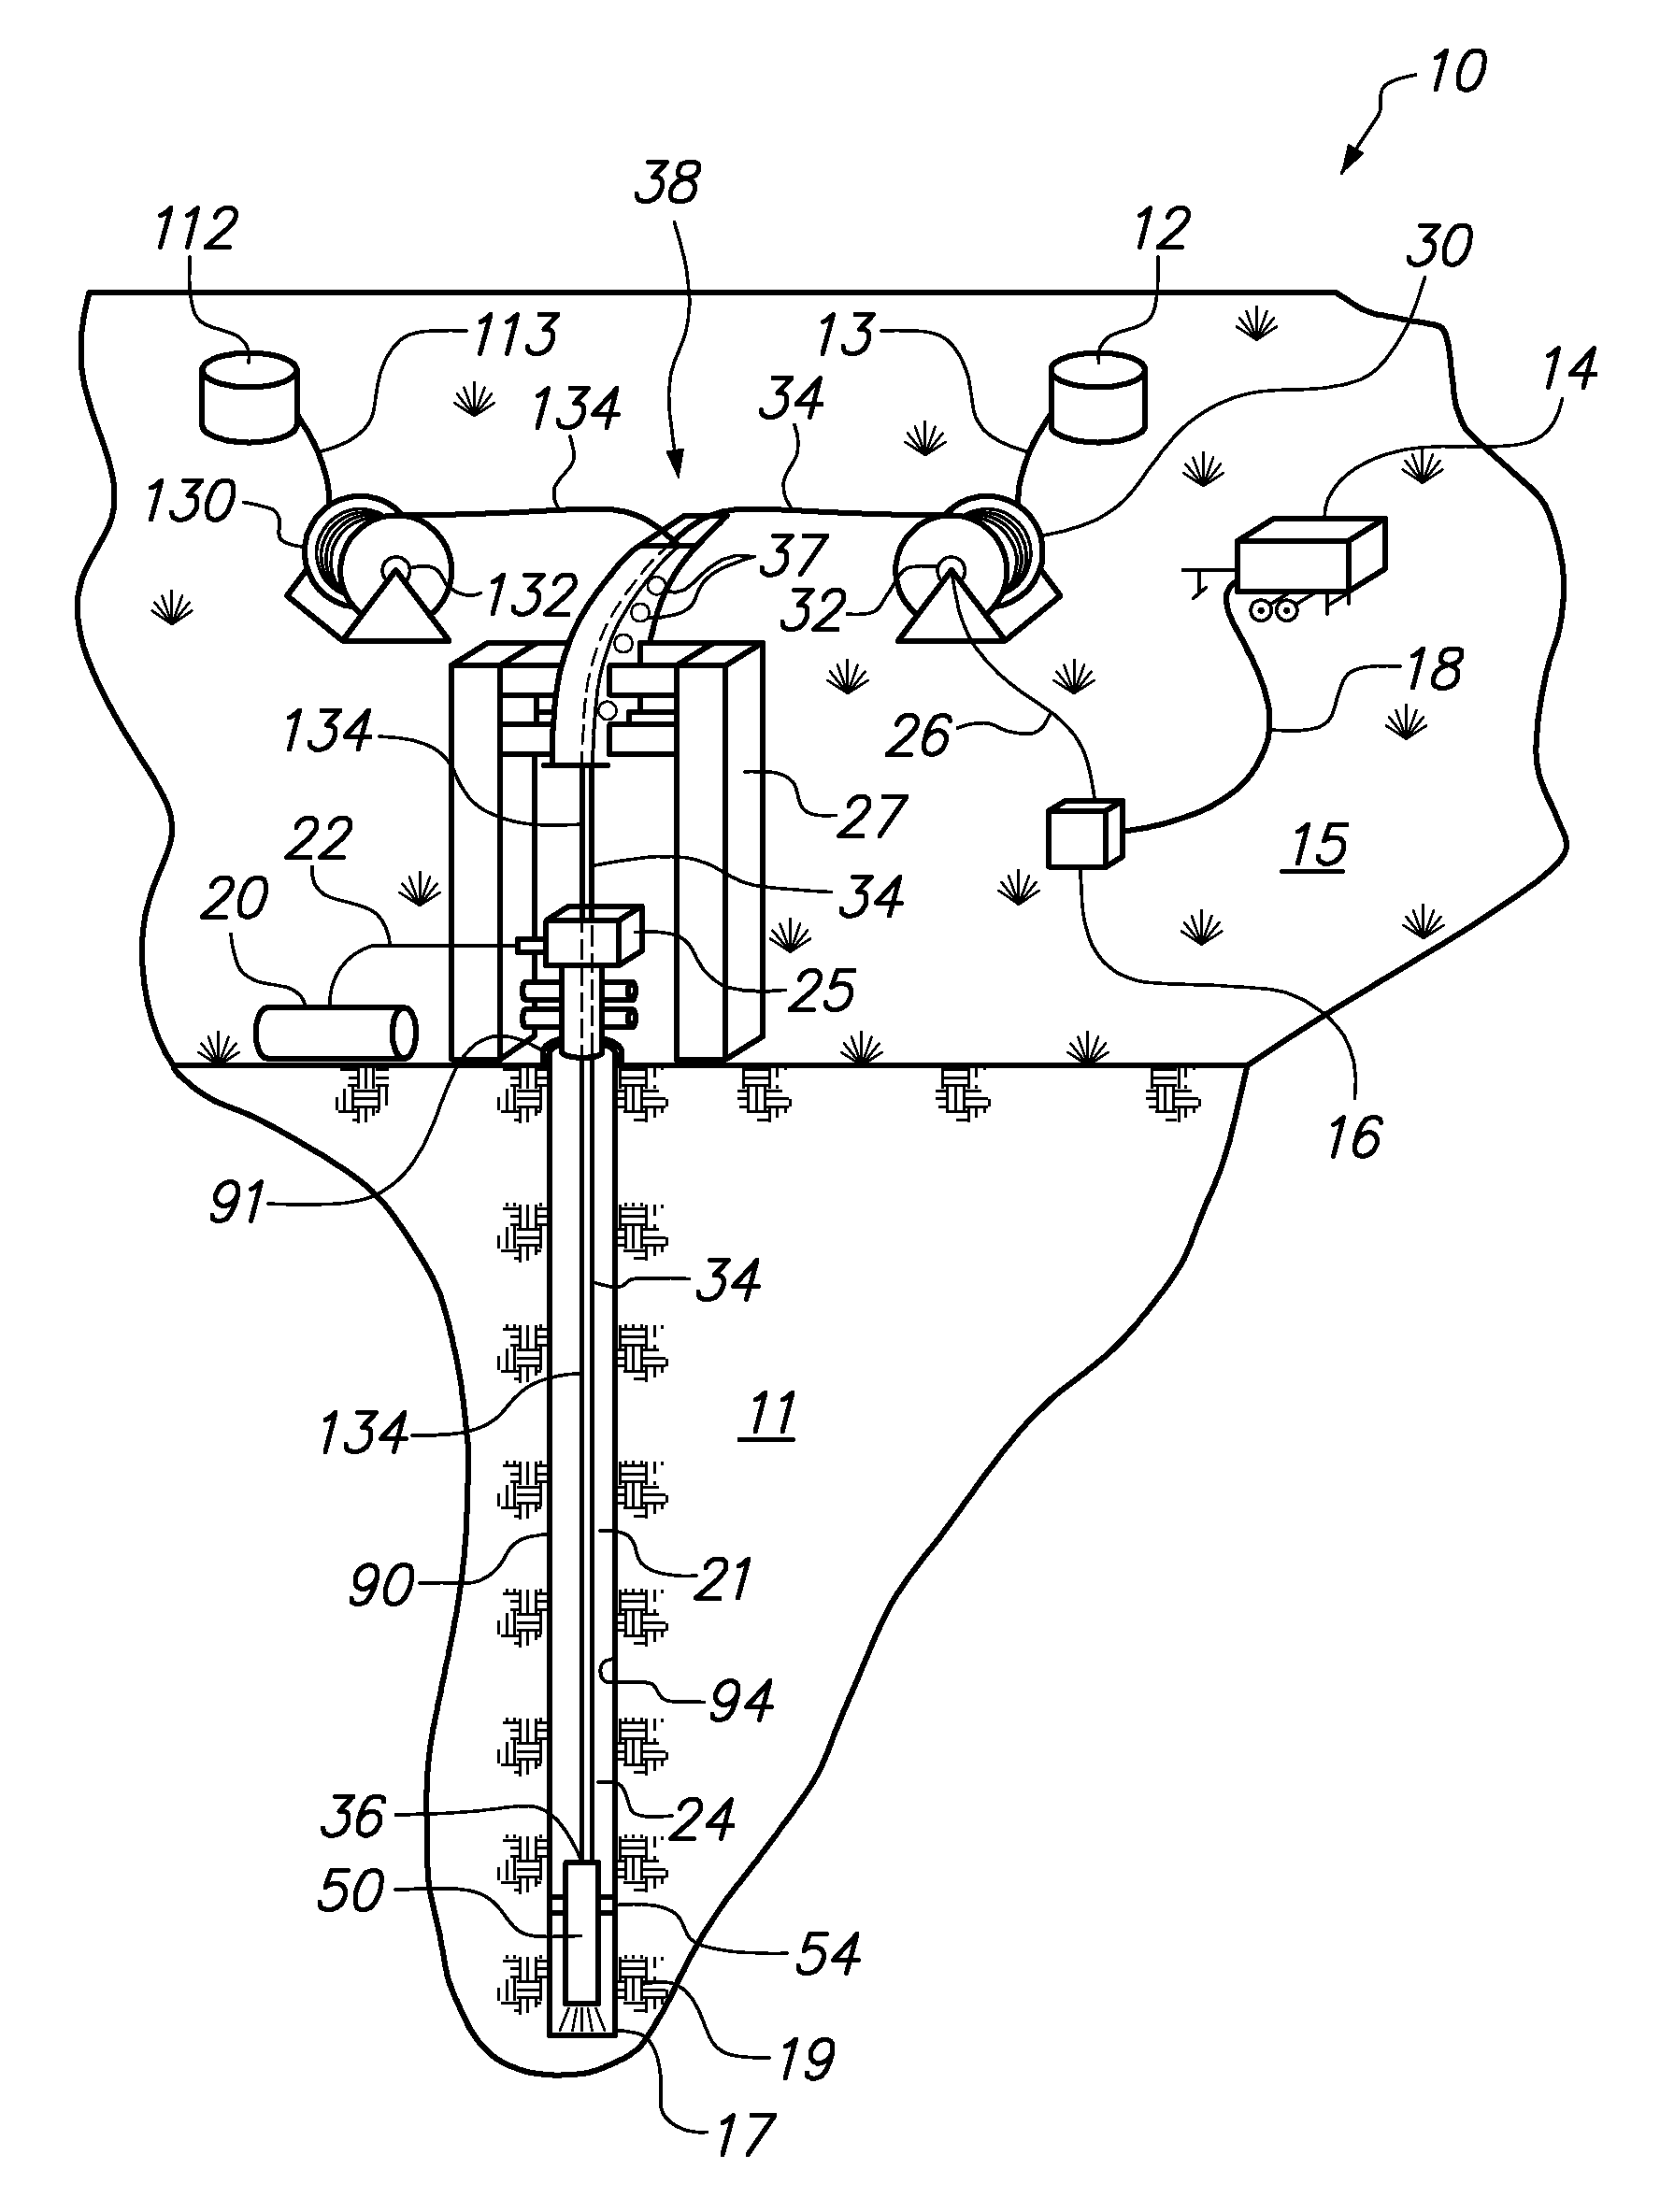 Apparatus and system to drill a bore using a laser